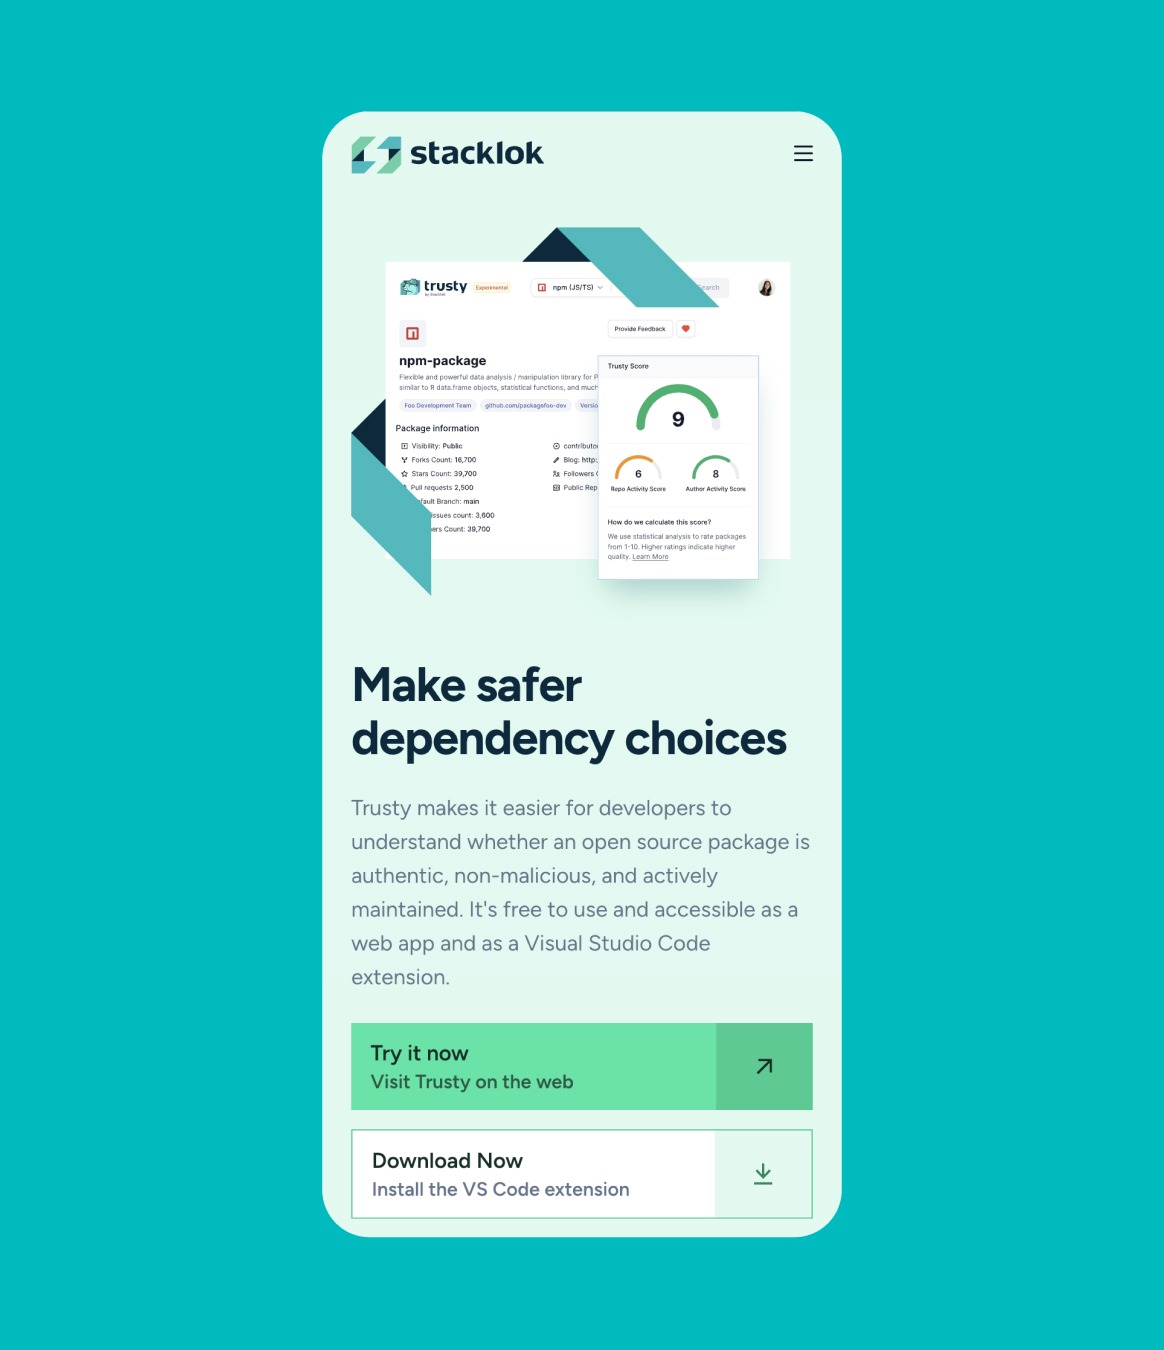 Showcase of the Stacklok website in a responsive mobile layout